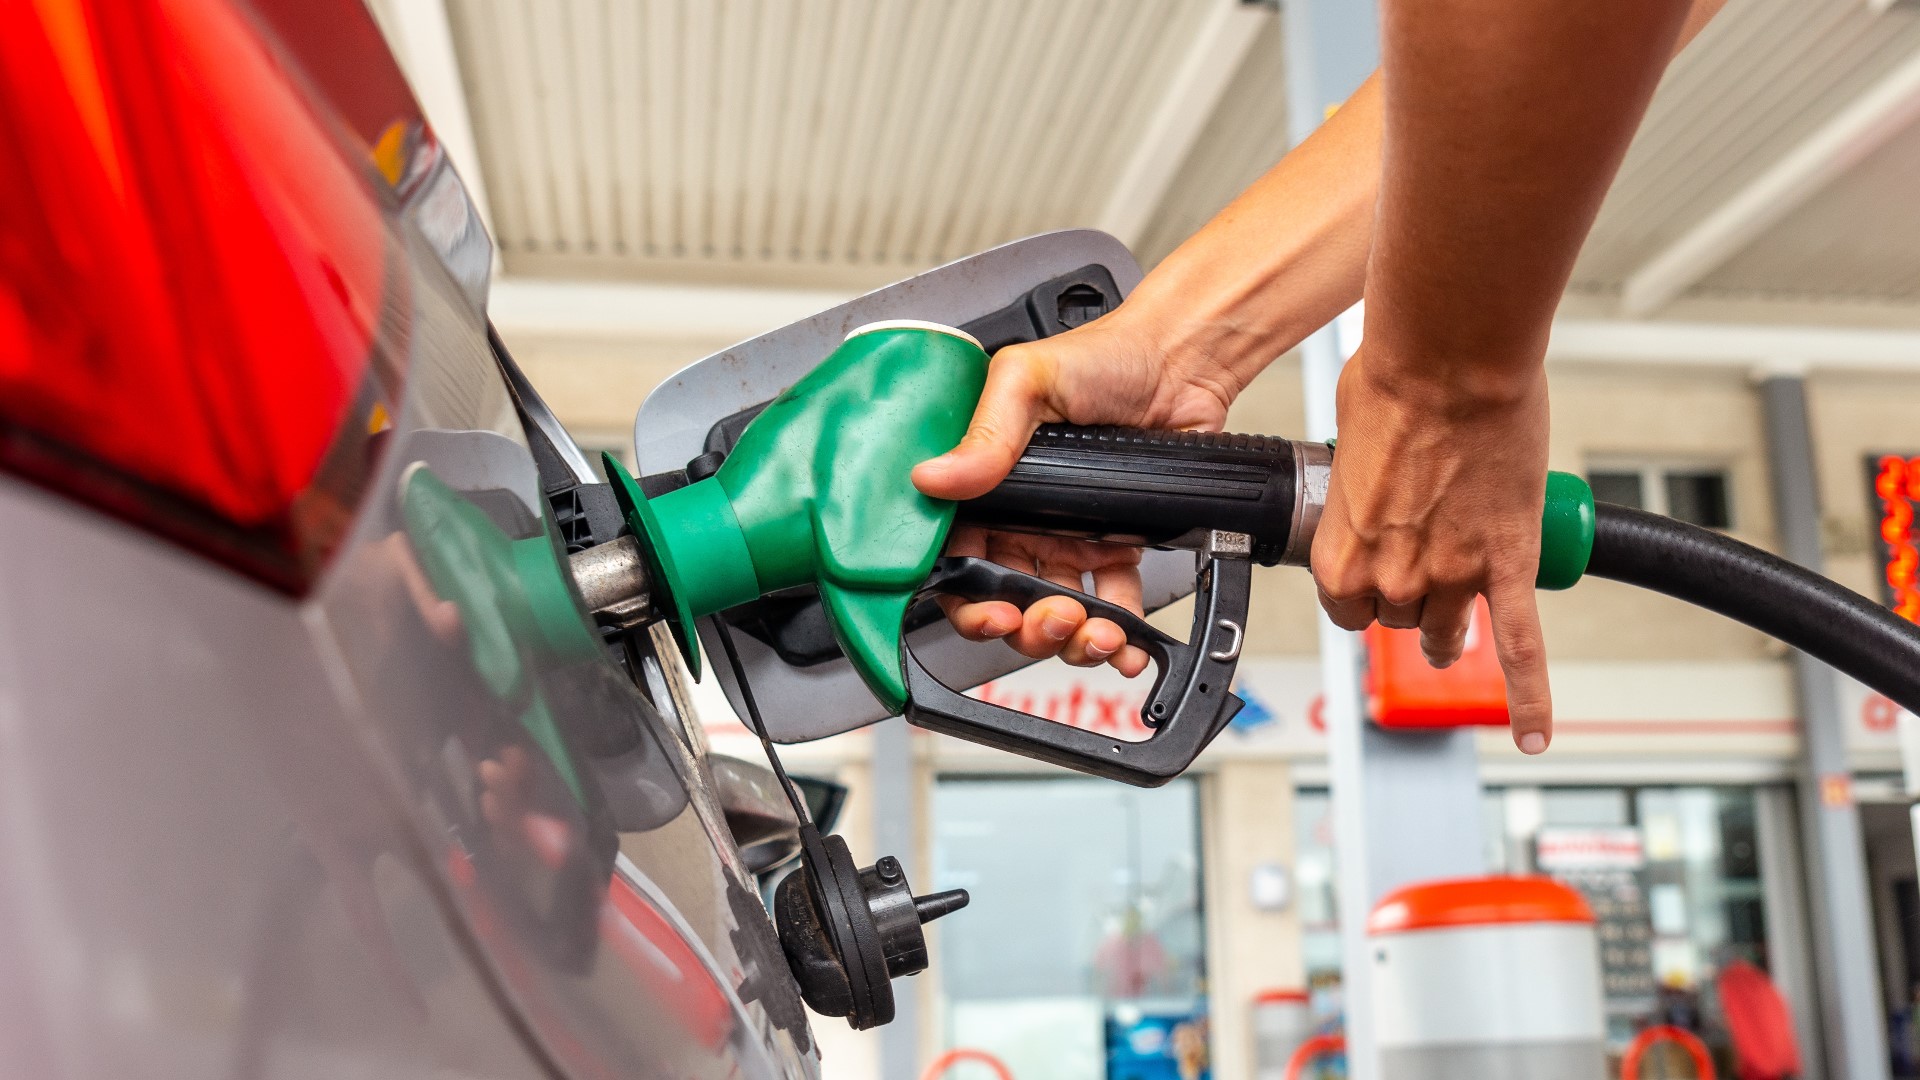 The average gas price in Spokane this week is $4.52 per gallon. In Idaho de average price is $3.85.